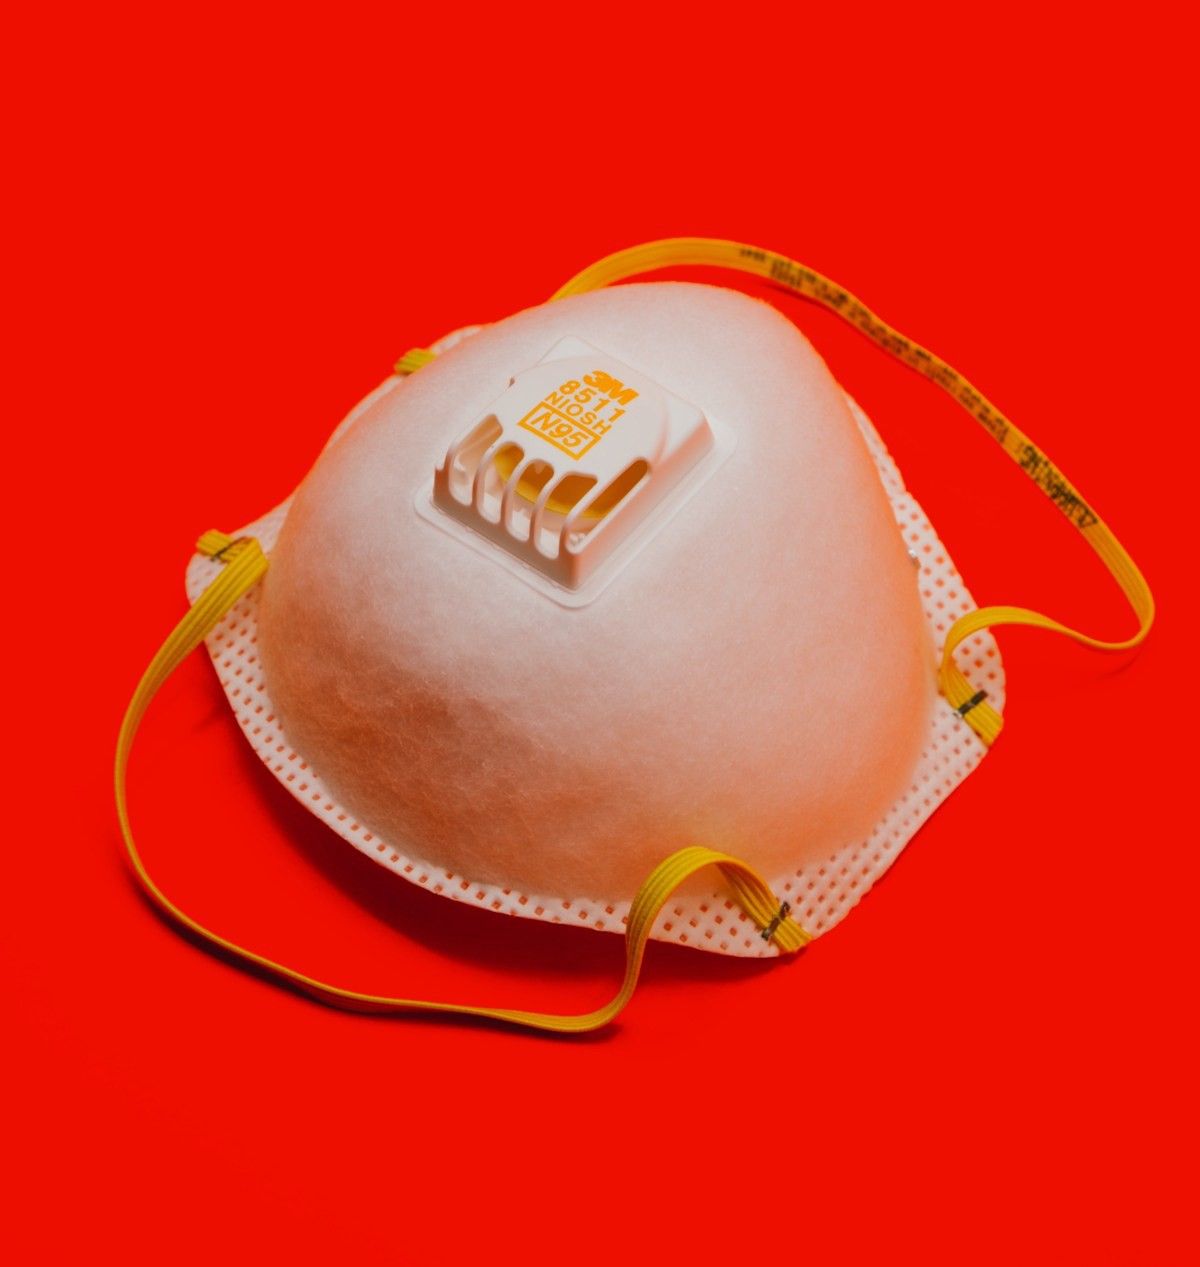 Respirator mask on a red background.